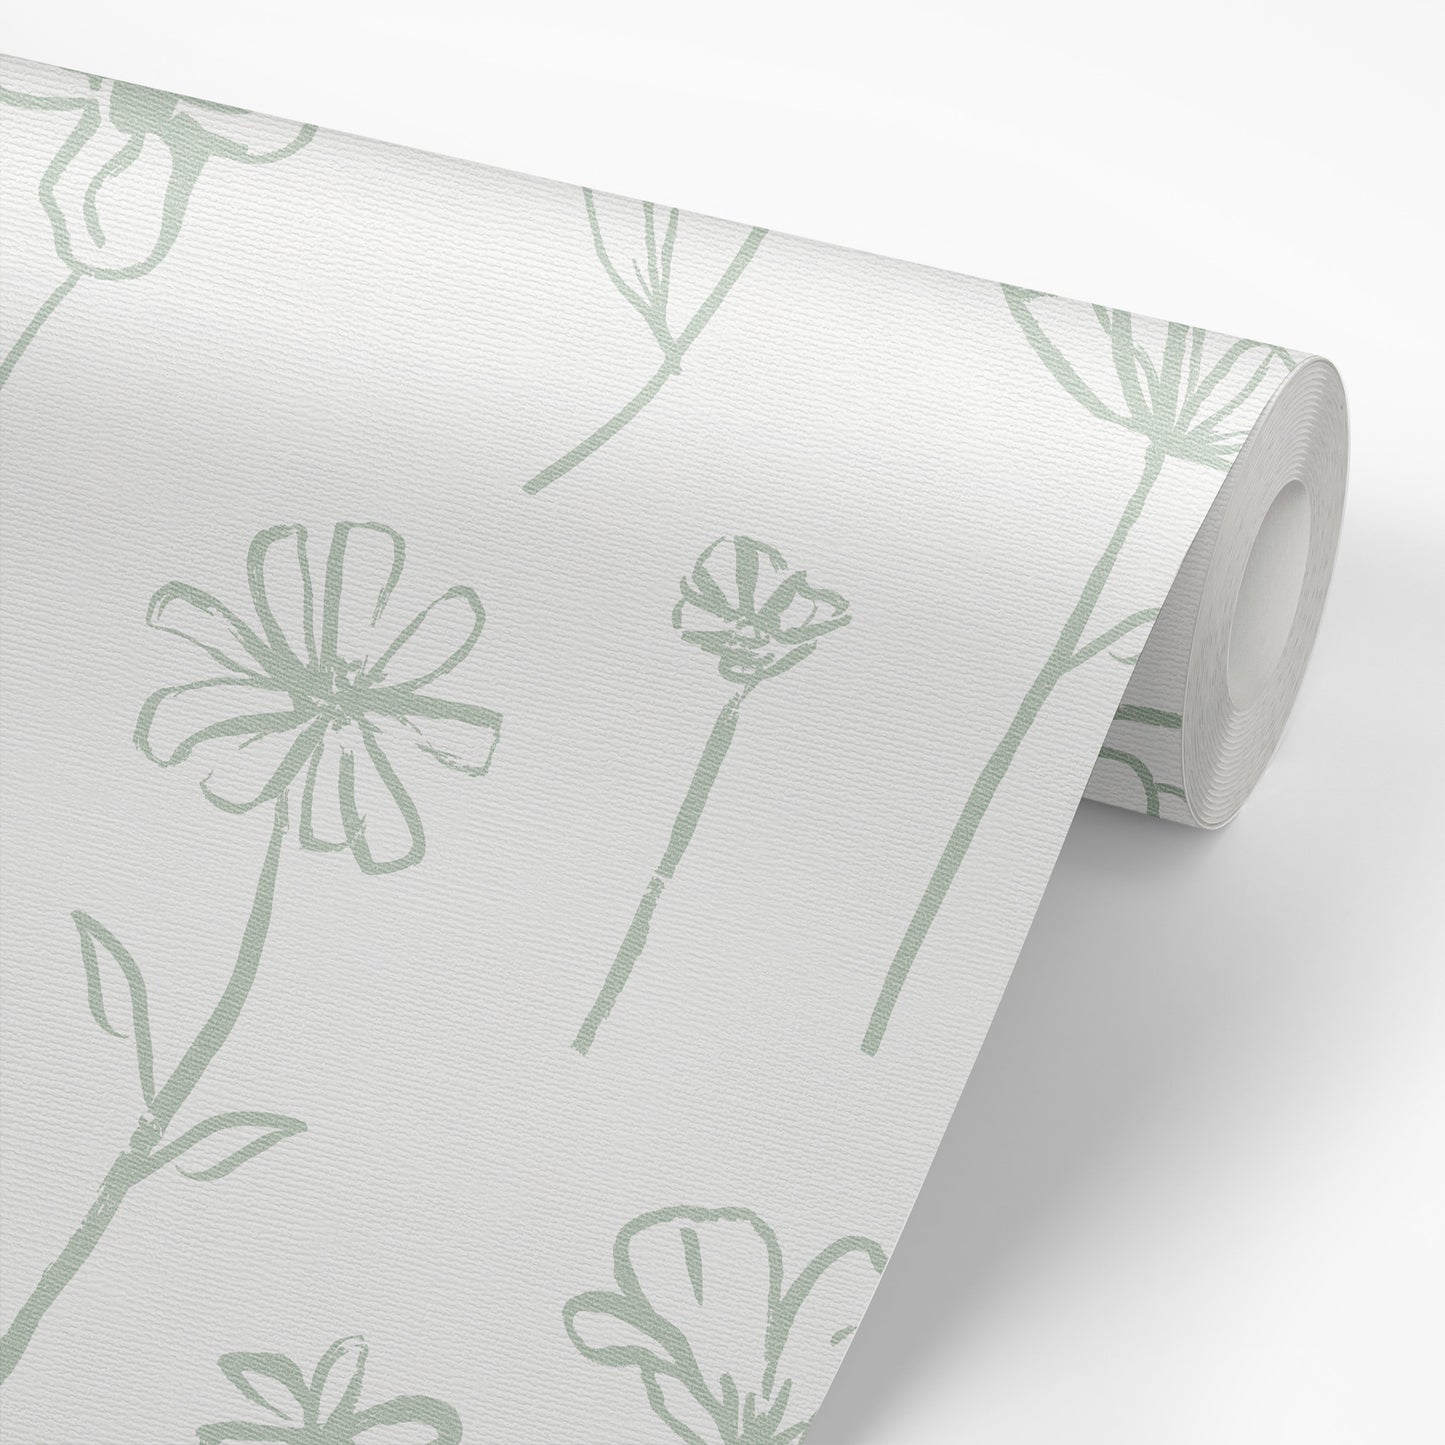 Wallpaper panel close up Nursery and Playroom featuring Lila's Floral Stems- a feminine dainty floral pattern